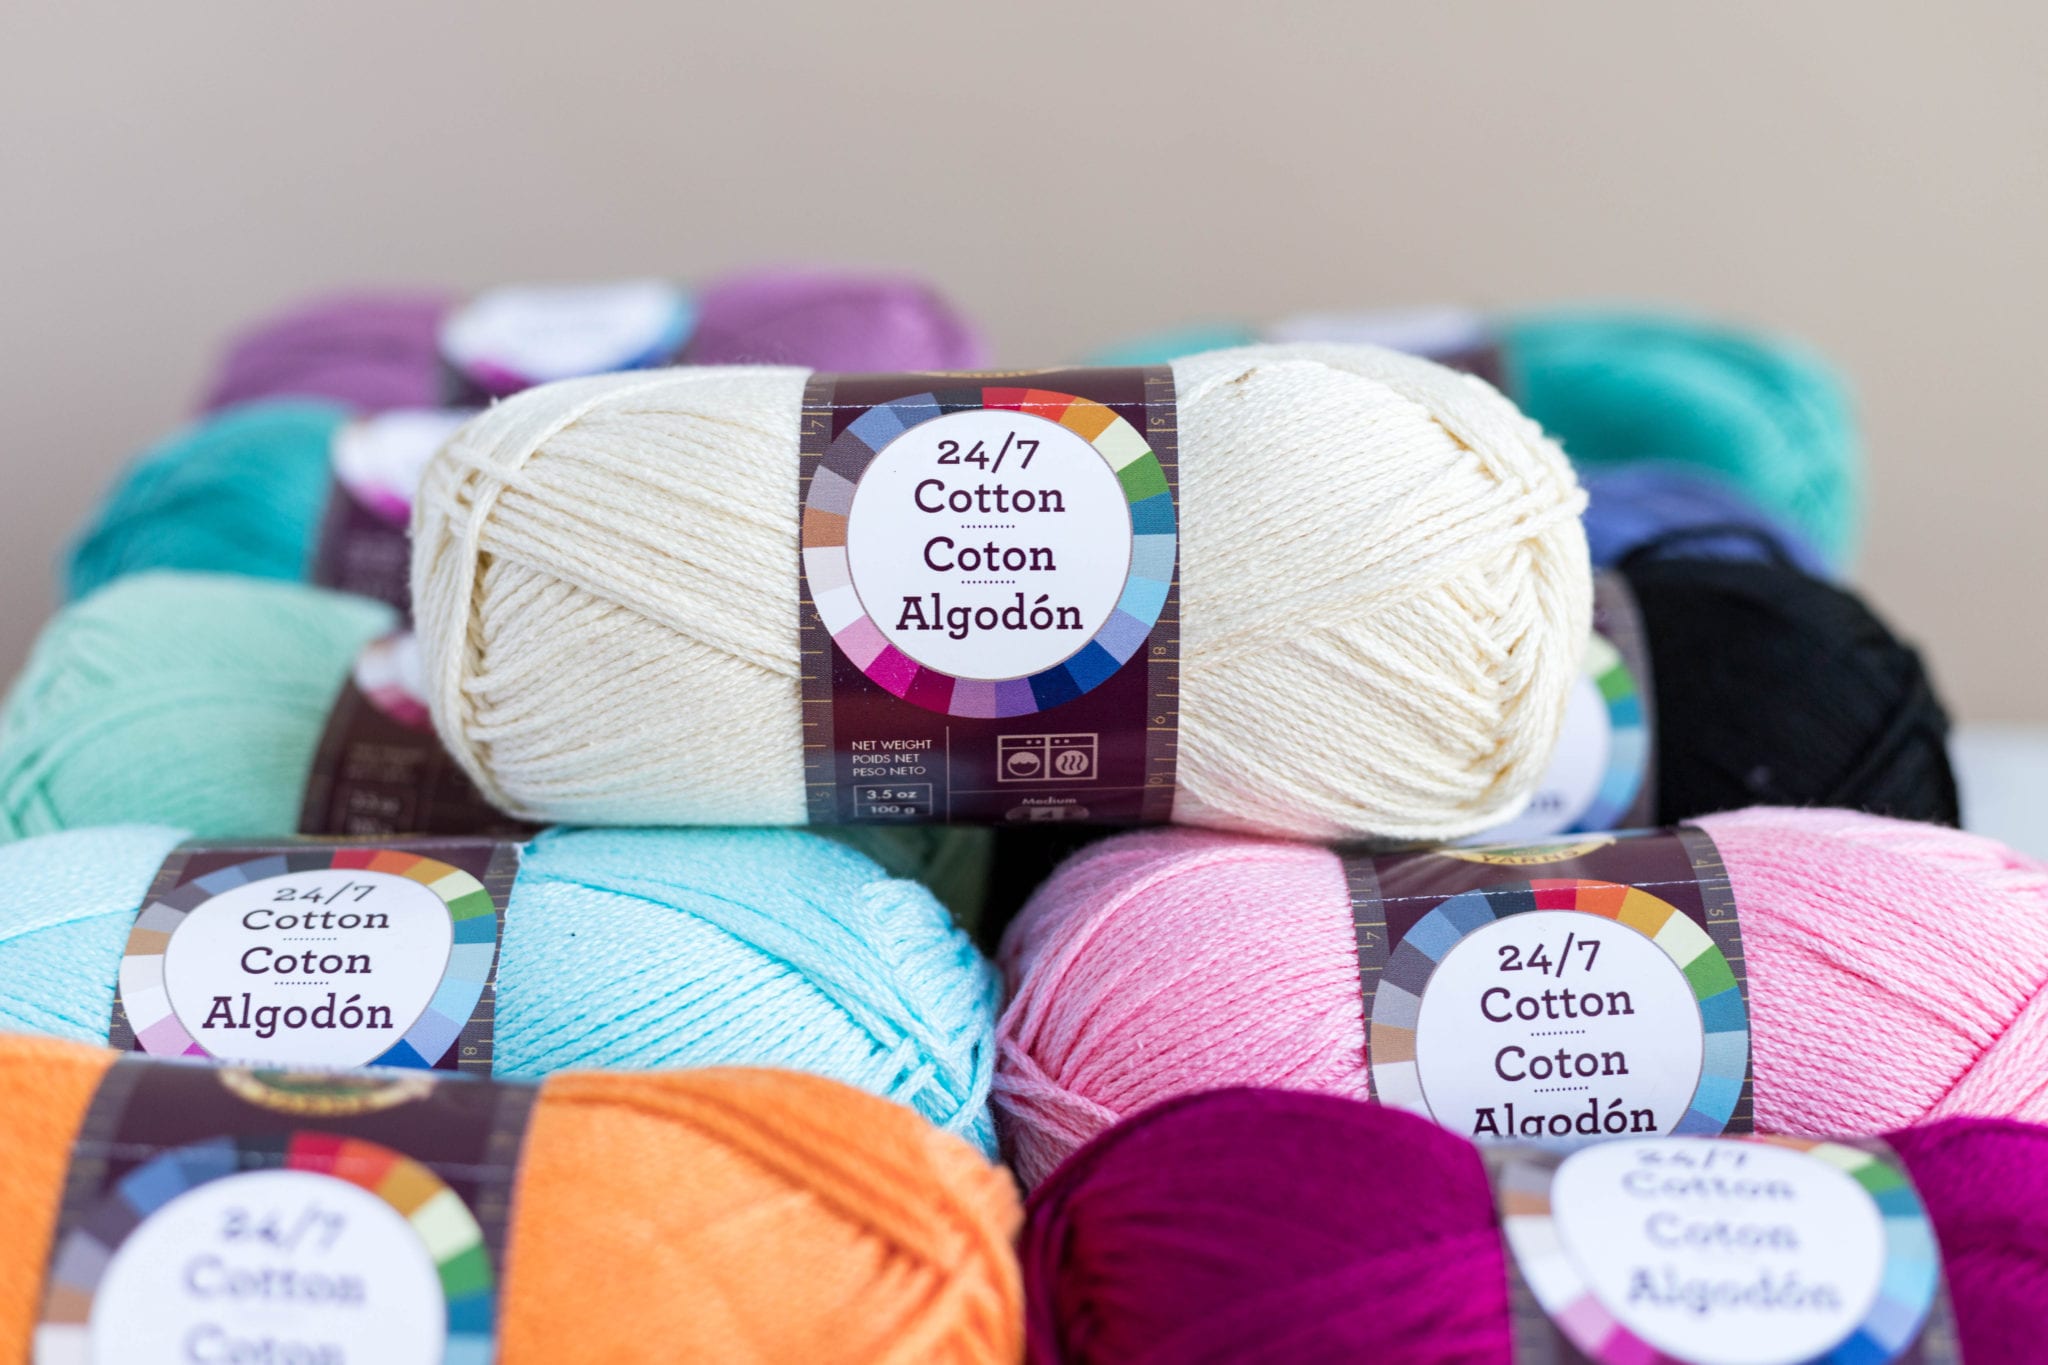 Get to Know 24/7 Cotton Yarn from Lion Brand Yarns 